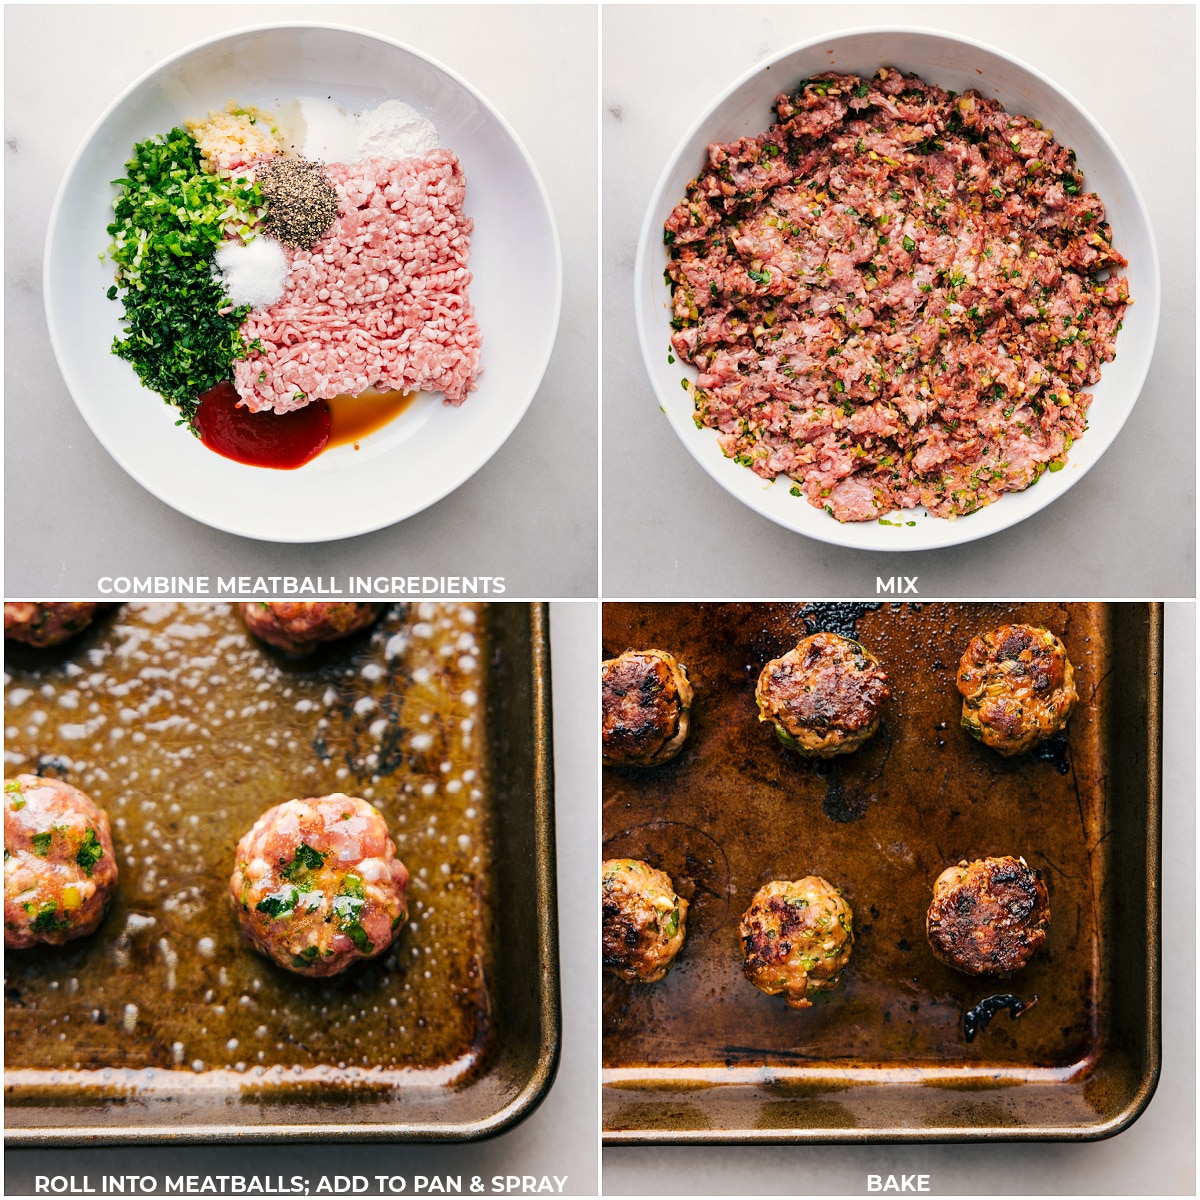 Mix meatball ingredients, shape into uniform balls, and bake to perfection.